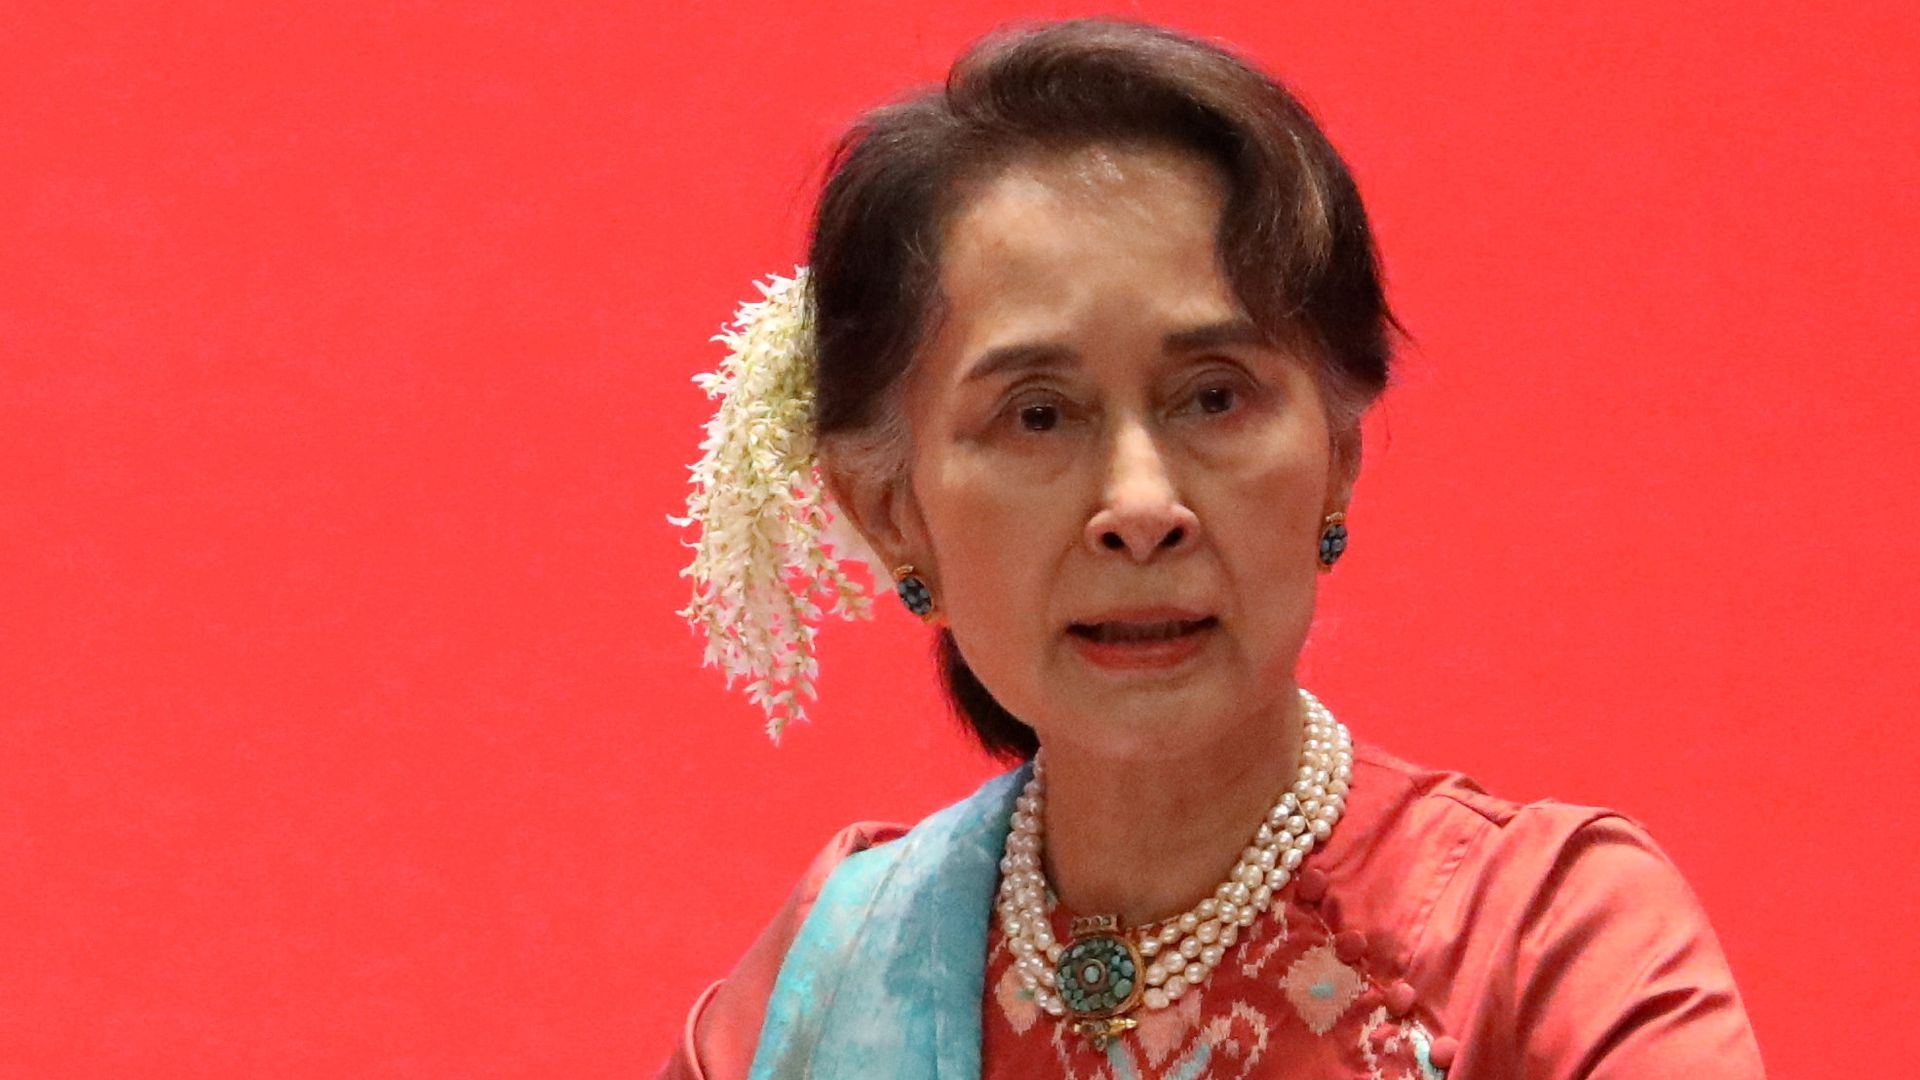 Aung San Suu Kyi moved from prison to house arrest in Myanmar - reports